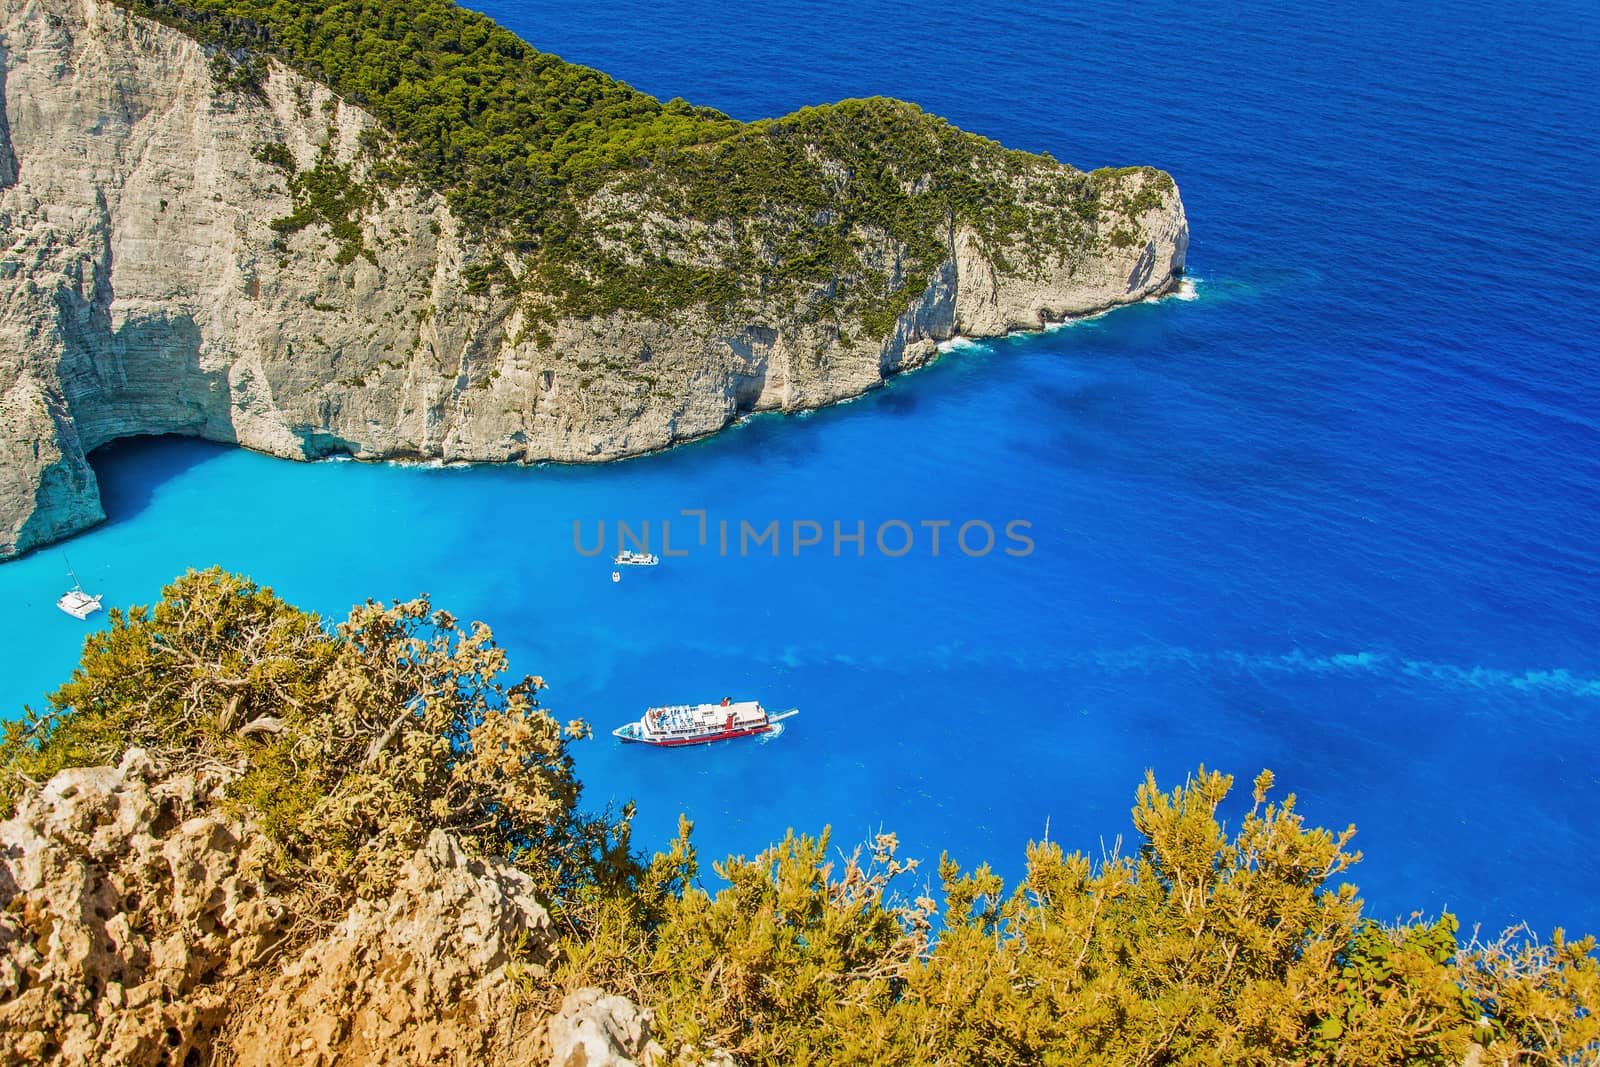 The view from the height of the bay wreck of Zakynthos in Greece
